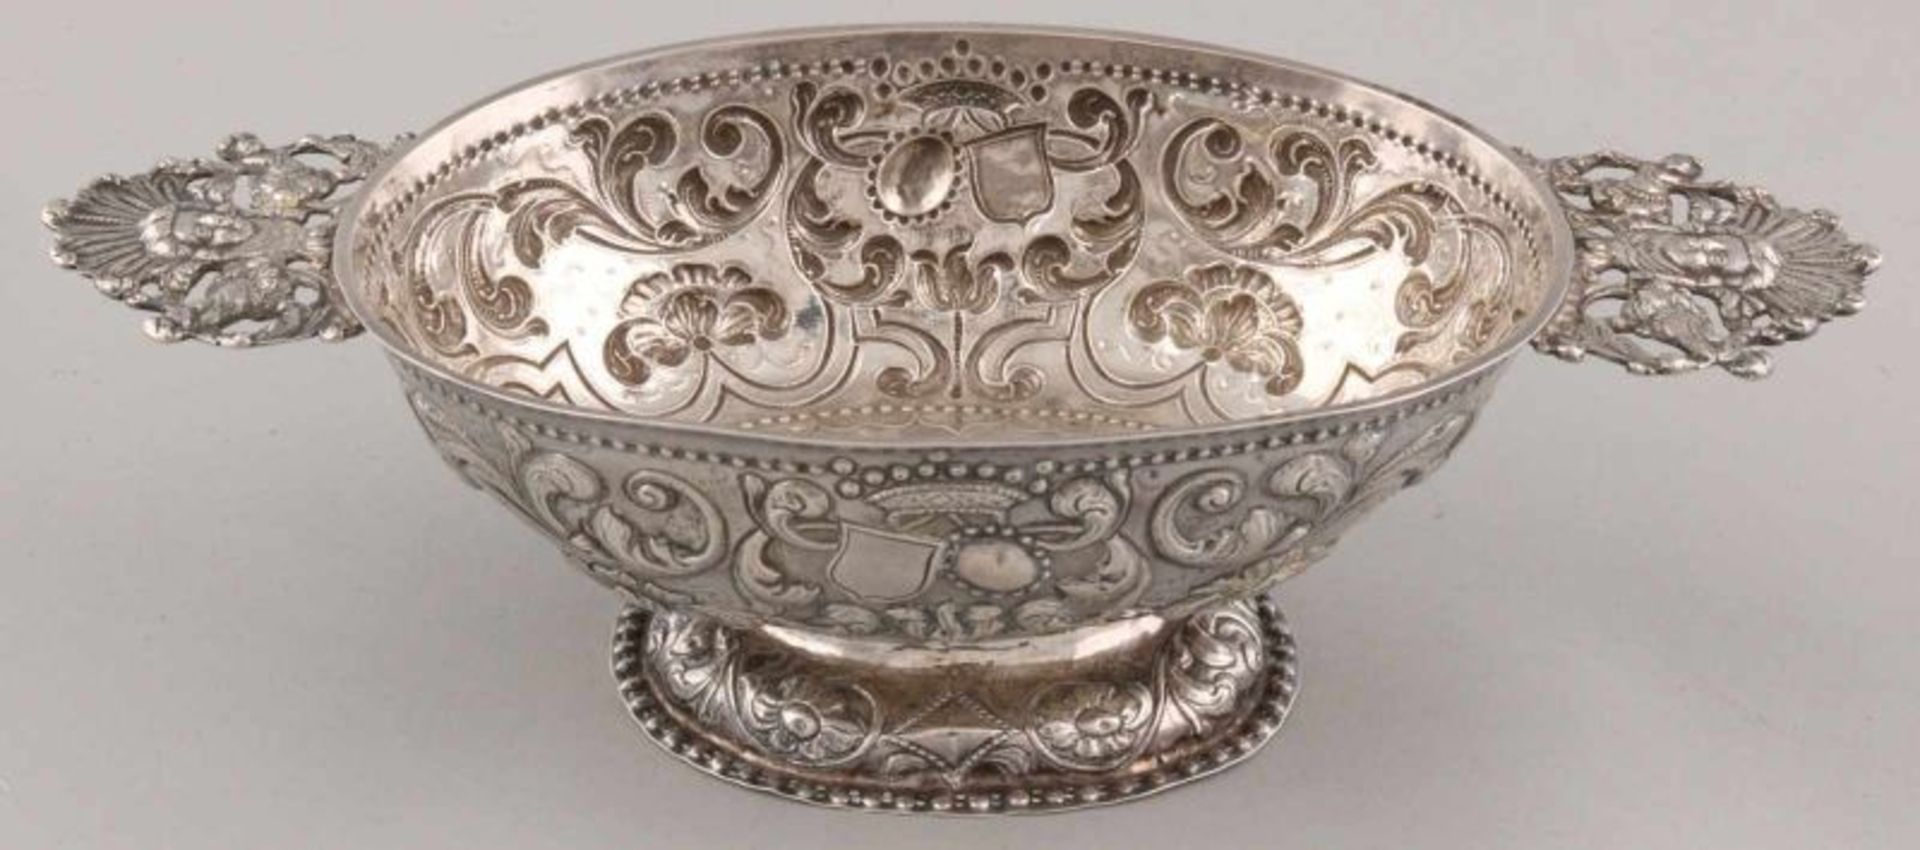 Antique silver brandy bowl, decorated with acanthus leaves, curls, shields and cartouches. The